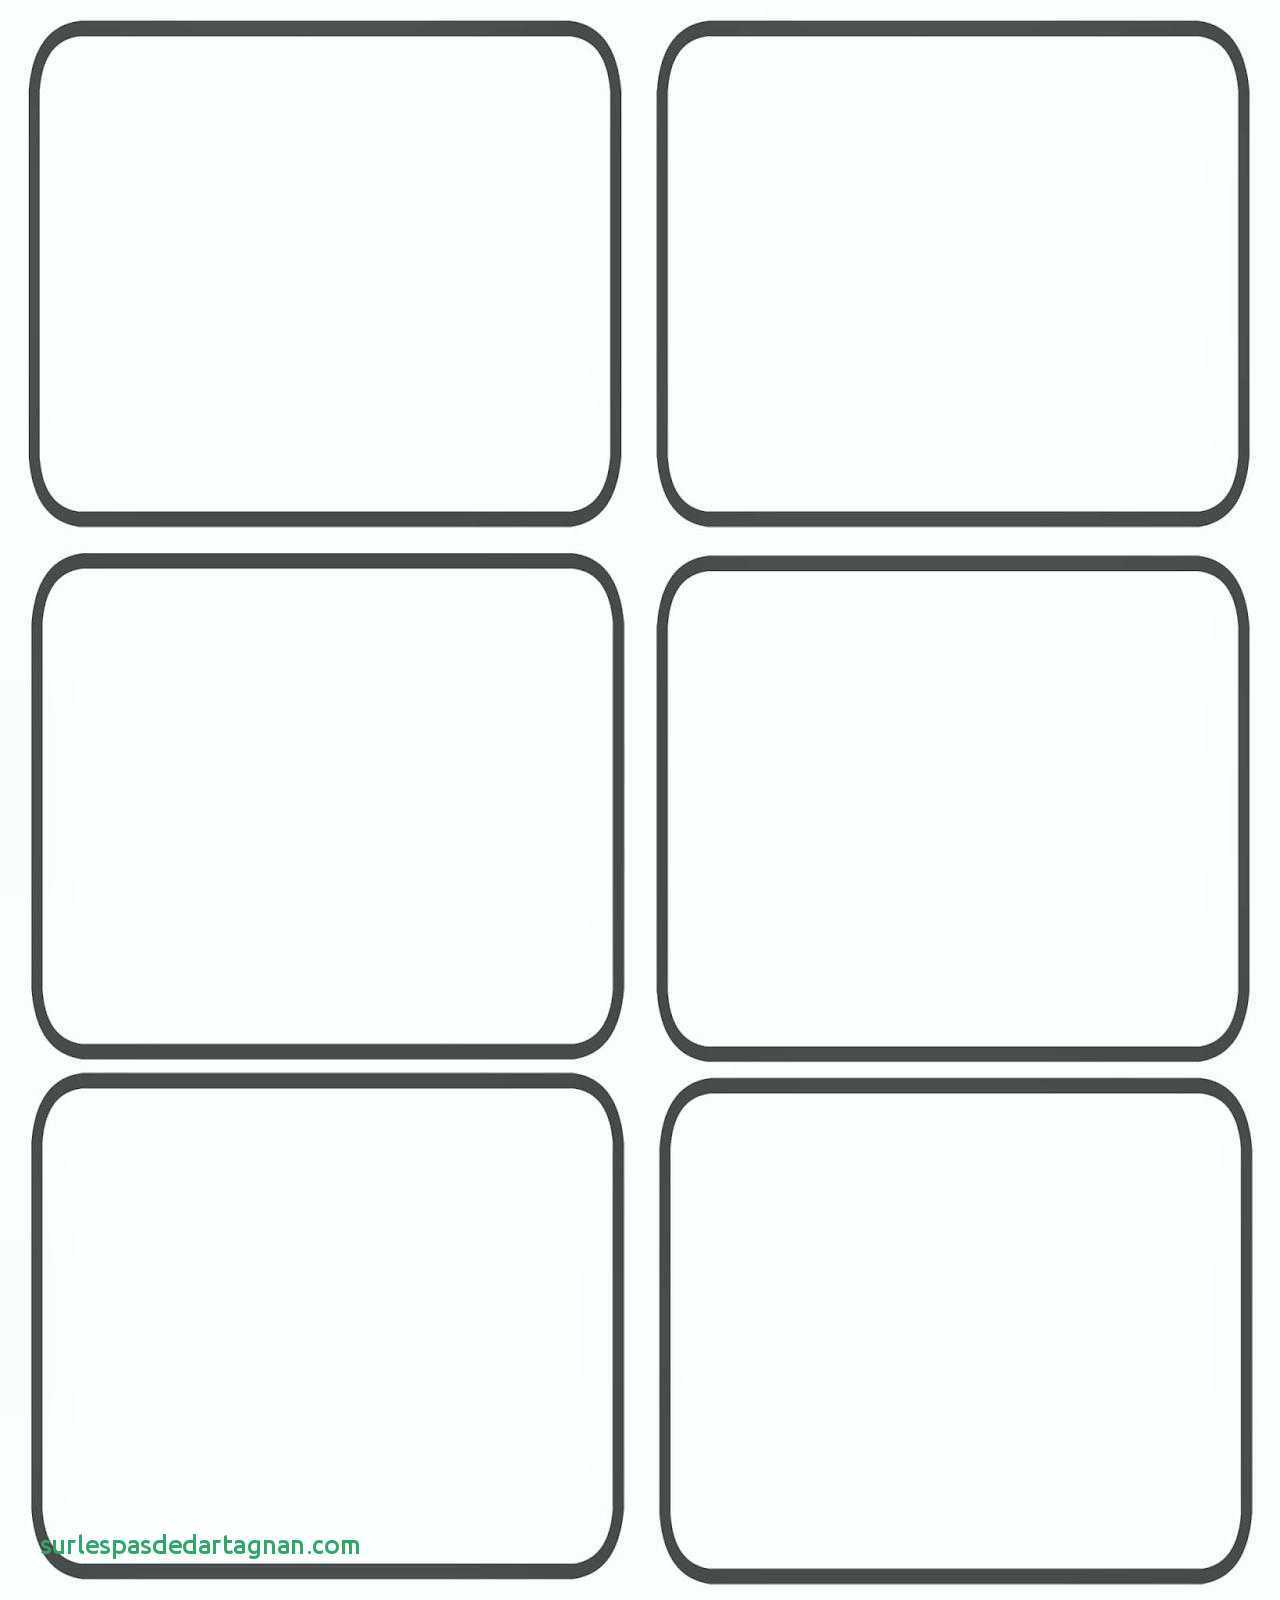 Playing Card Templates Free | C Punkt Regarding Template For Playing Cards Printable